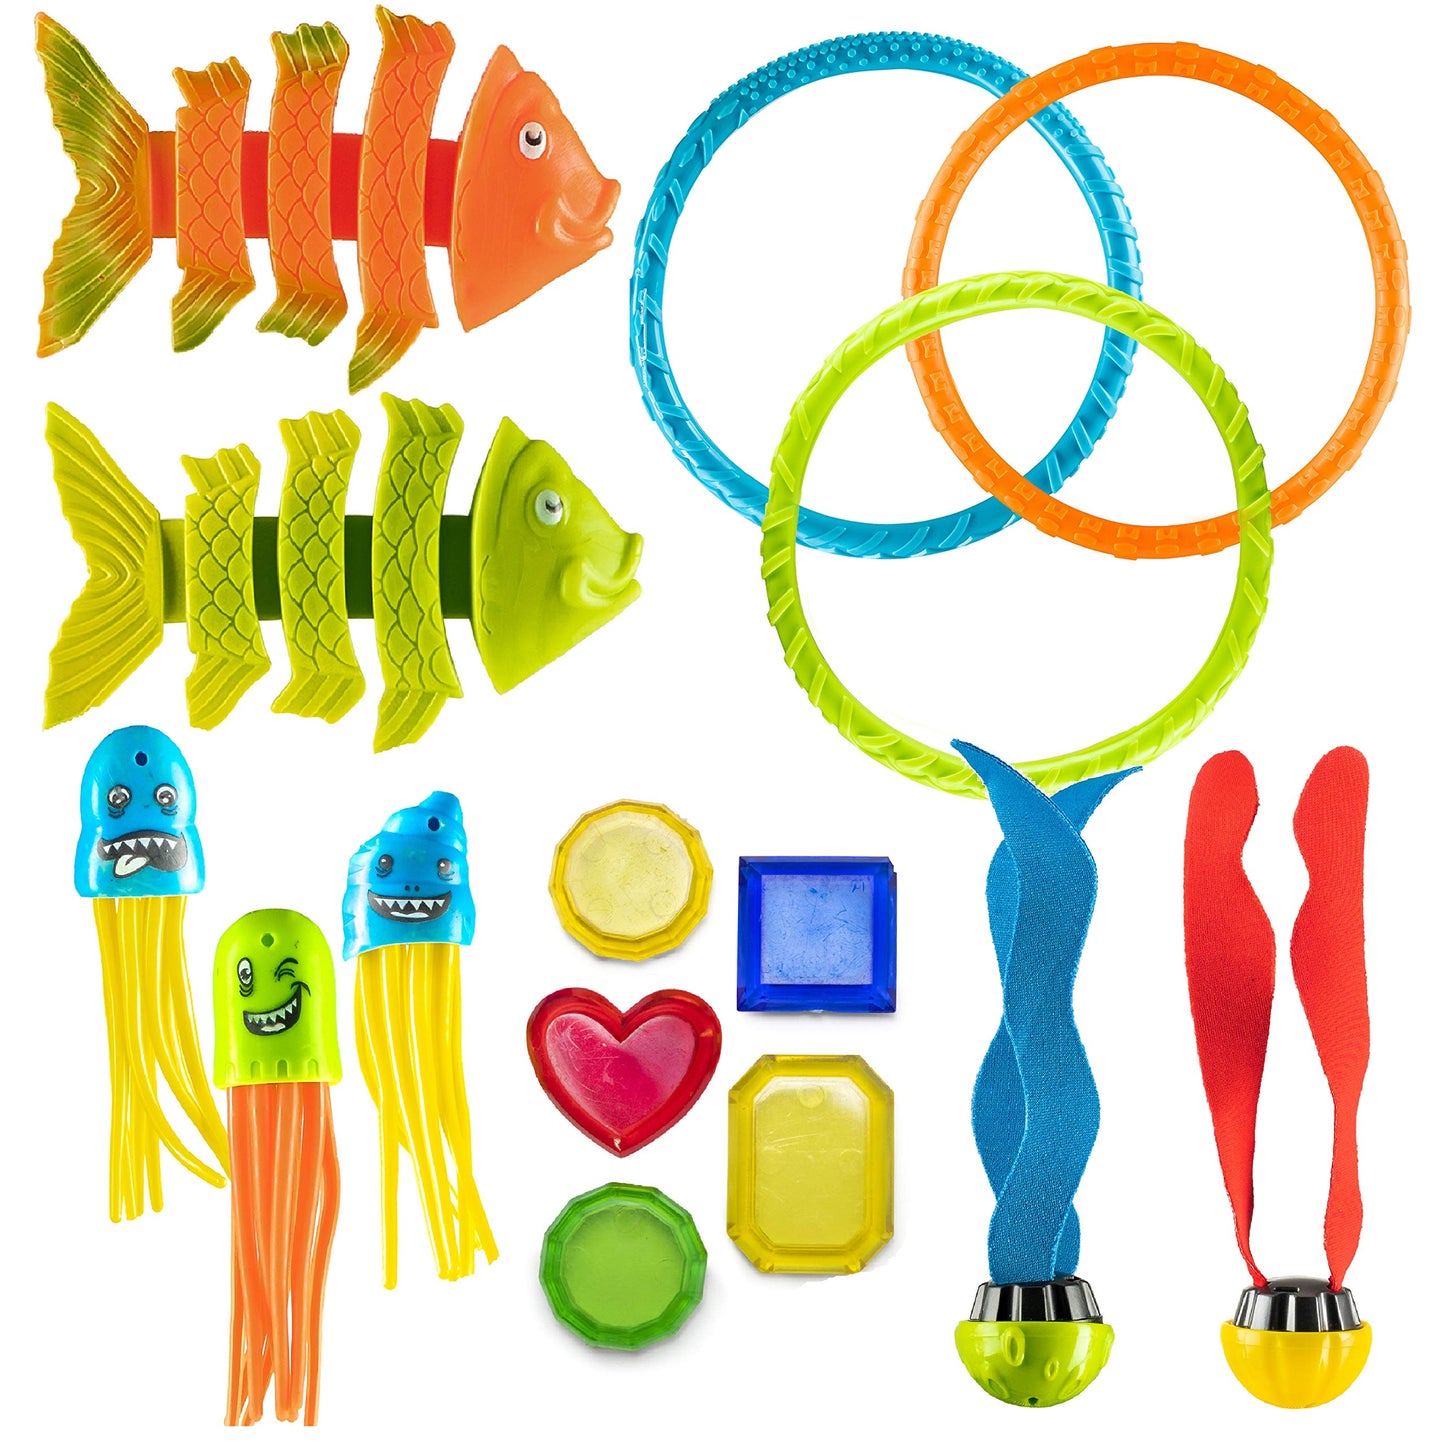 PREXTEX 15 Pack Pool Diving Toy Set with Carrying Bag for Kids Summer Fun - Sinking Diving Toys for Underwater Pool Swimming